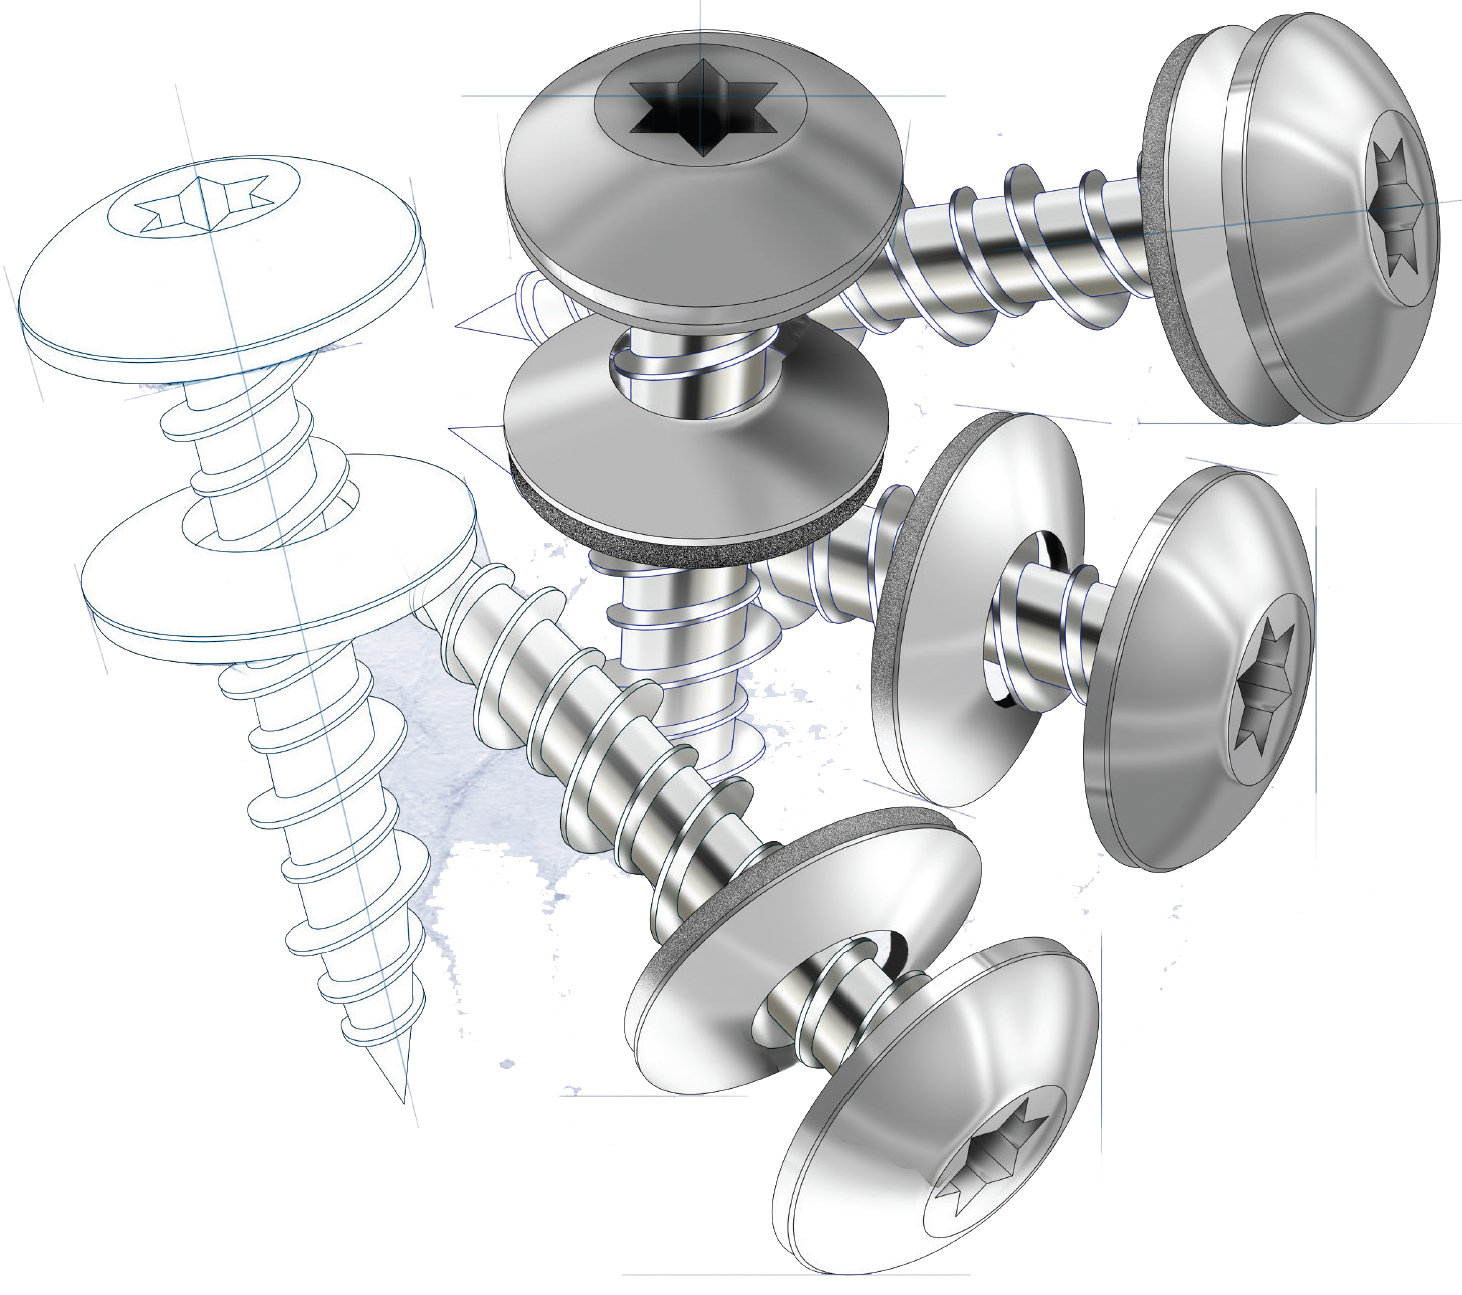 Screws are our standard fasteners, Stronger buildings start with the materials we use.